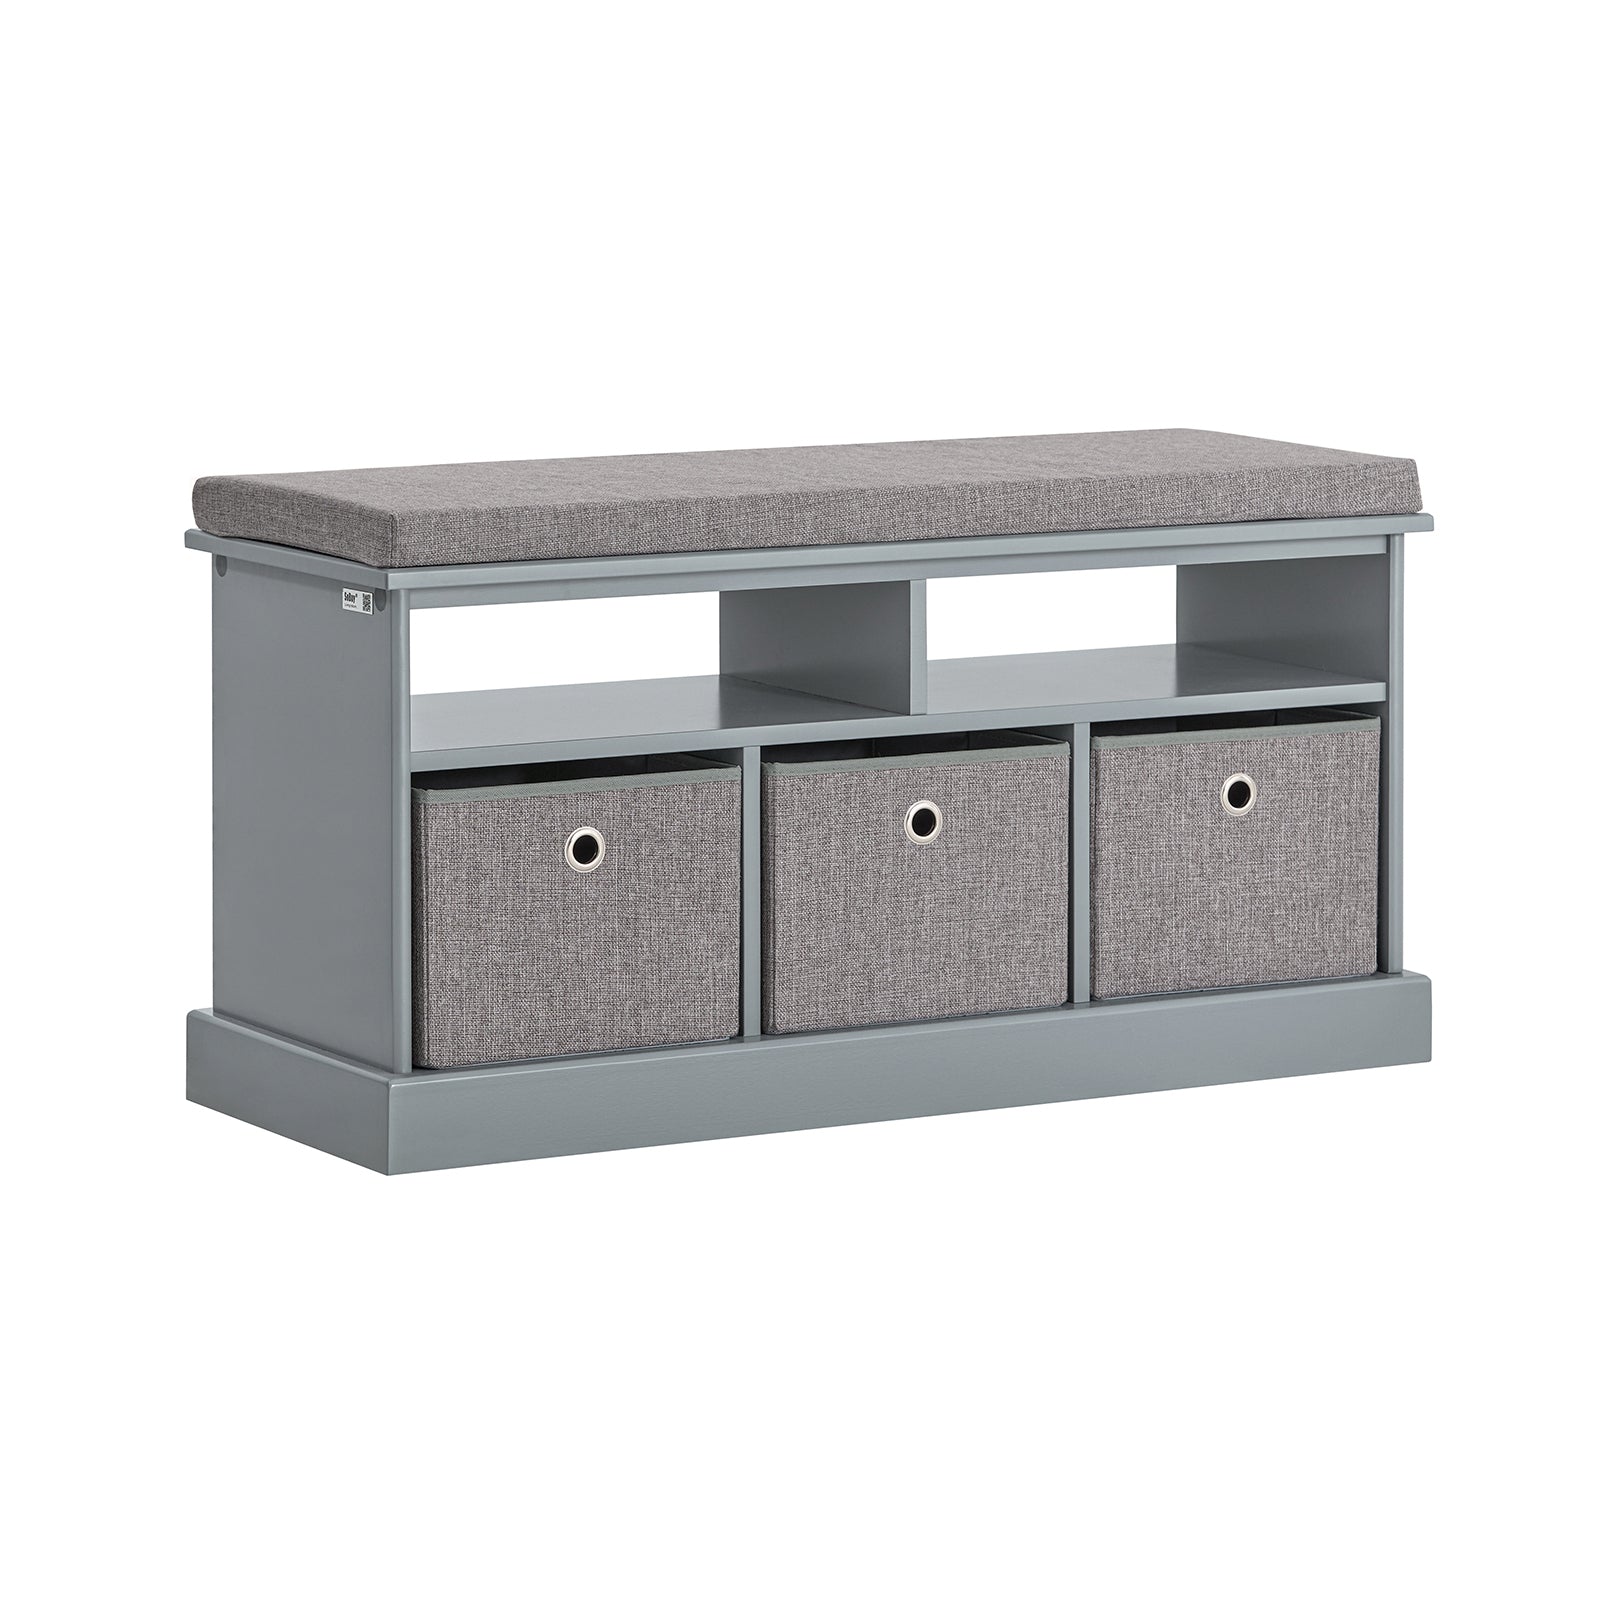 SoBuy FSR67-DG,Storage Bench with 3 Fabric Drawers and Seat Cushion,Hallway Shoe Bench,Shoe Cabinet,Grey